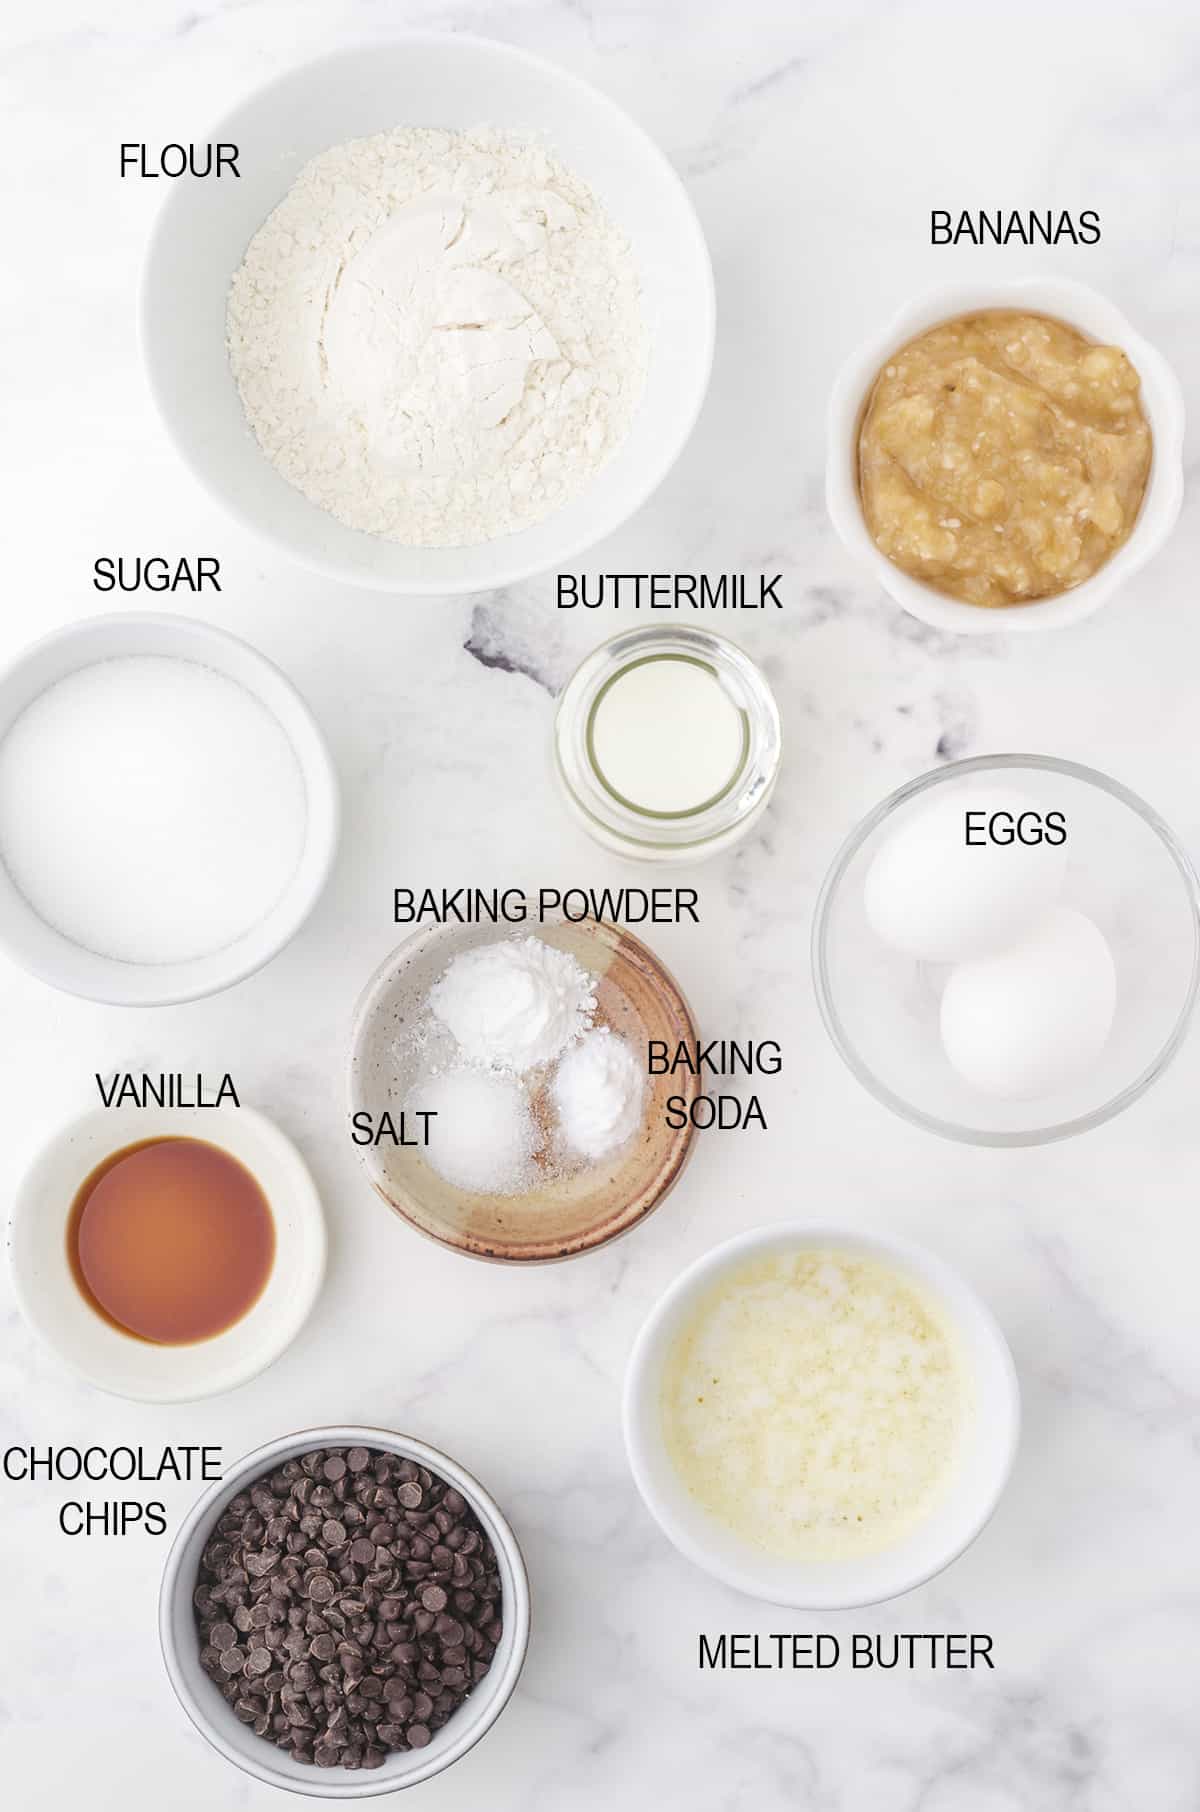 ingredients needed for the chocolate banana cupcake recipe